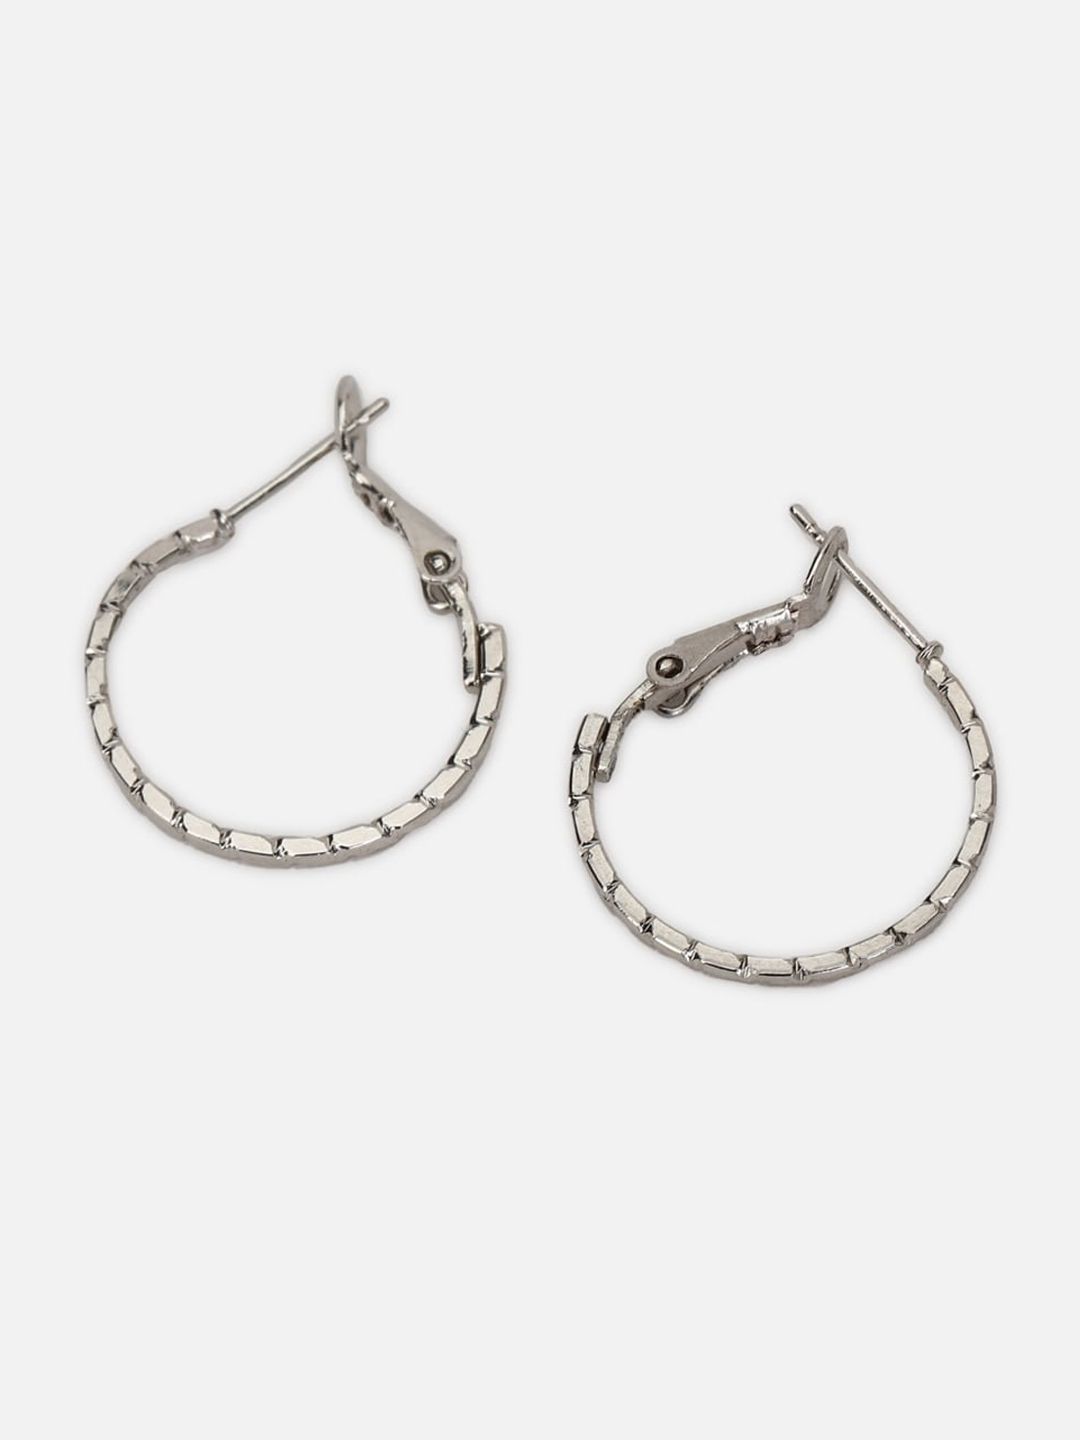 27 OFF on Silver Style Personalised Customised 925 Sterling Silver Bamboo  Name Hoop Earrings for Women and Girls on Amazon  PaisaWapascom